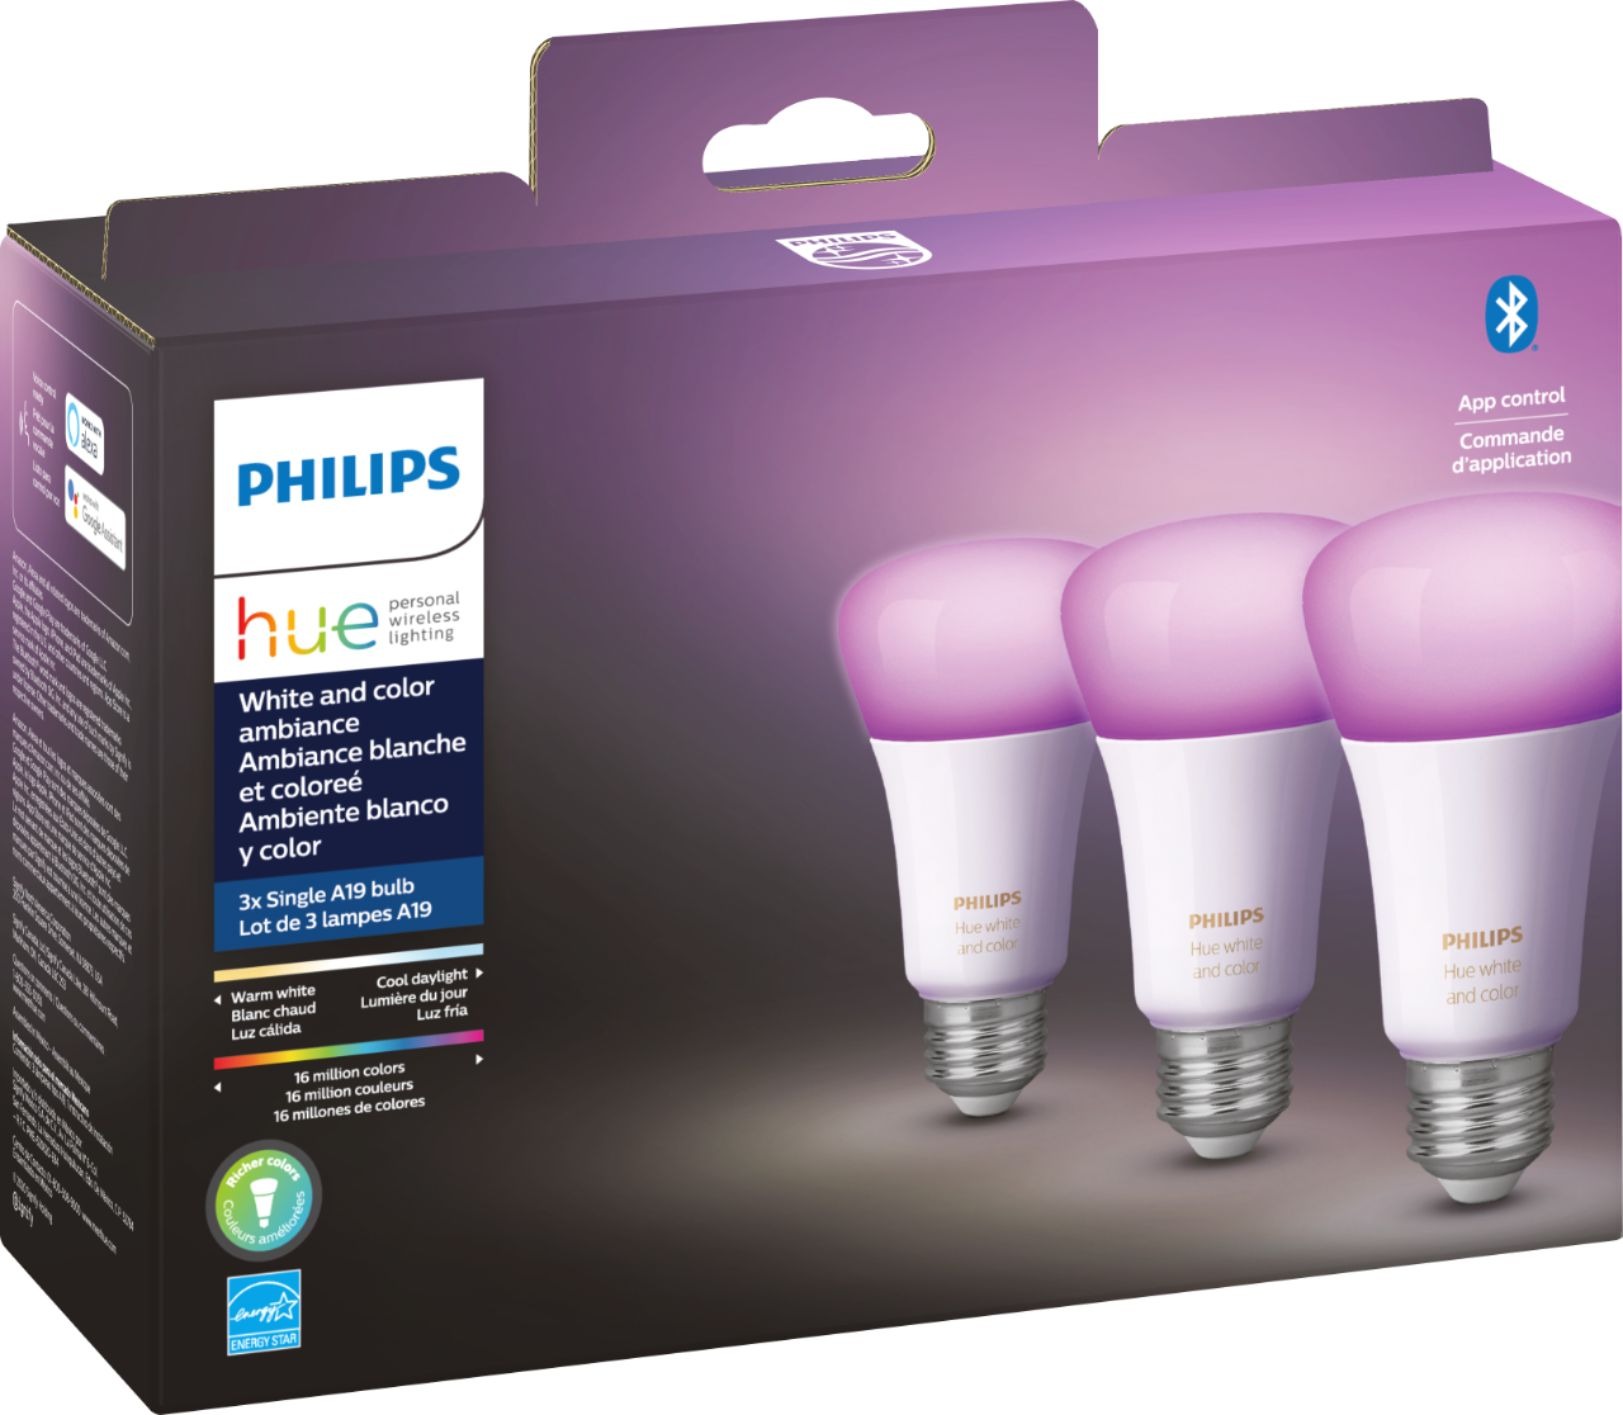 Philips Hue White & Color Ambiance A19 Smart Bulbs (3-Pack) - $89.99